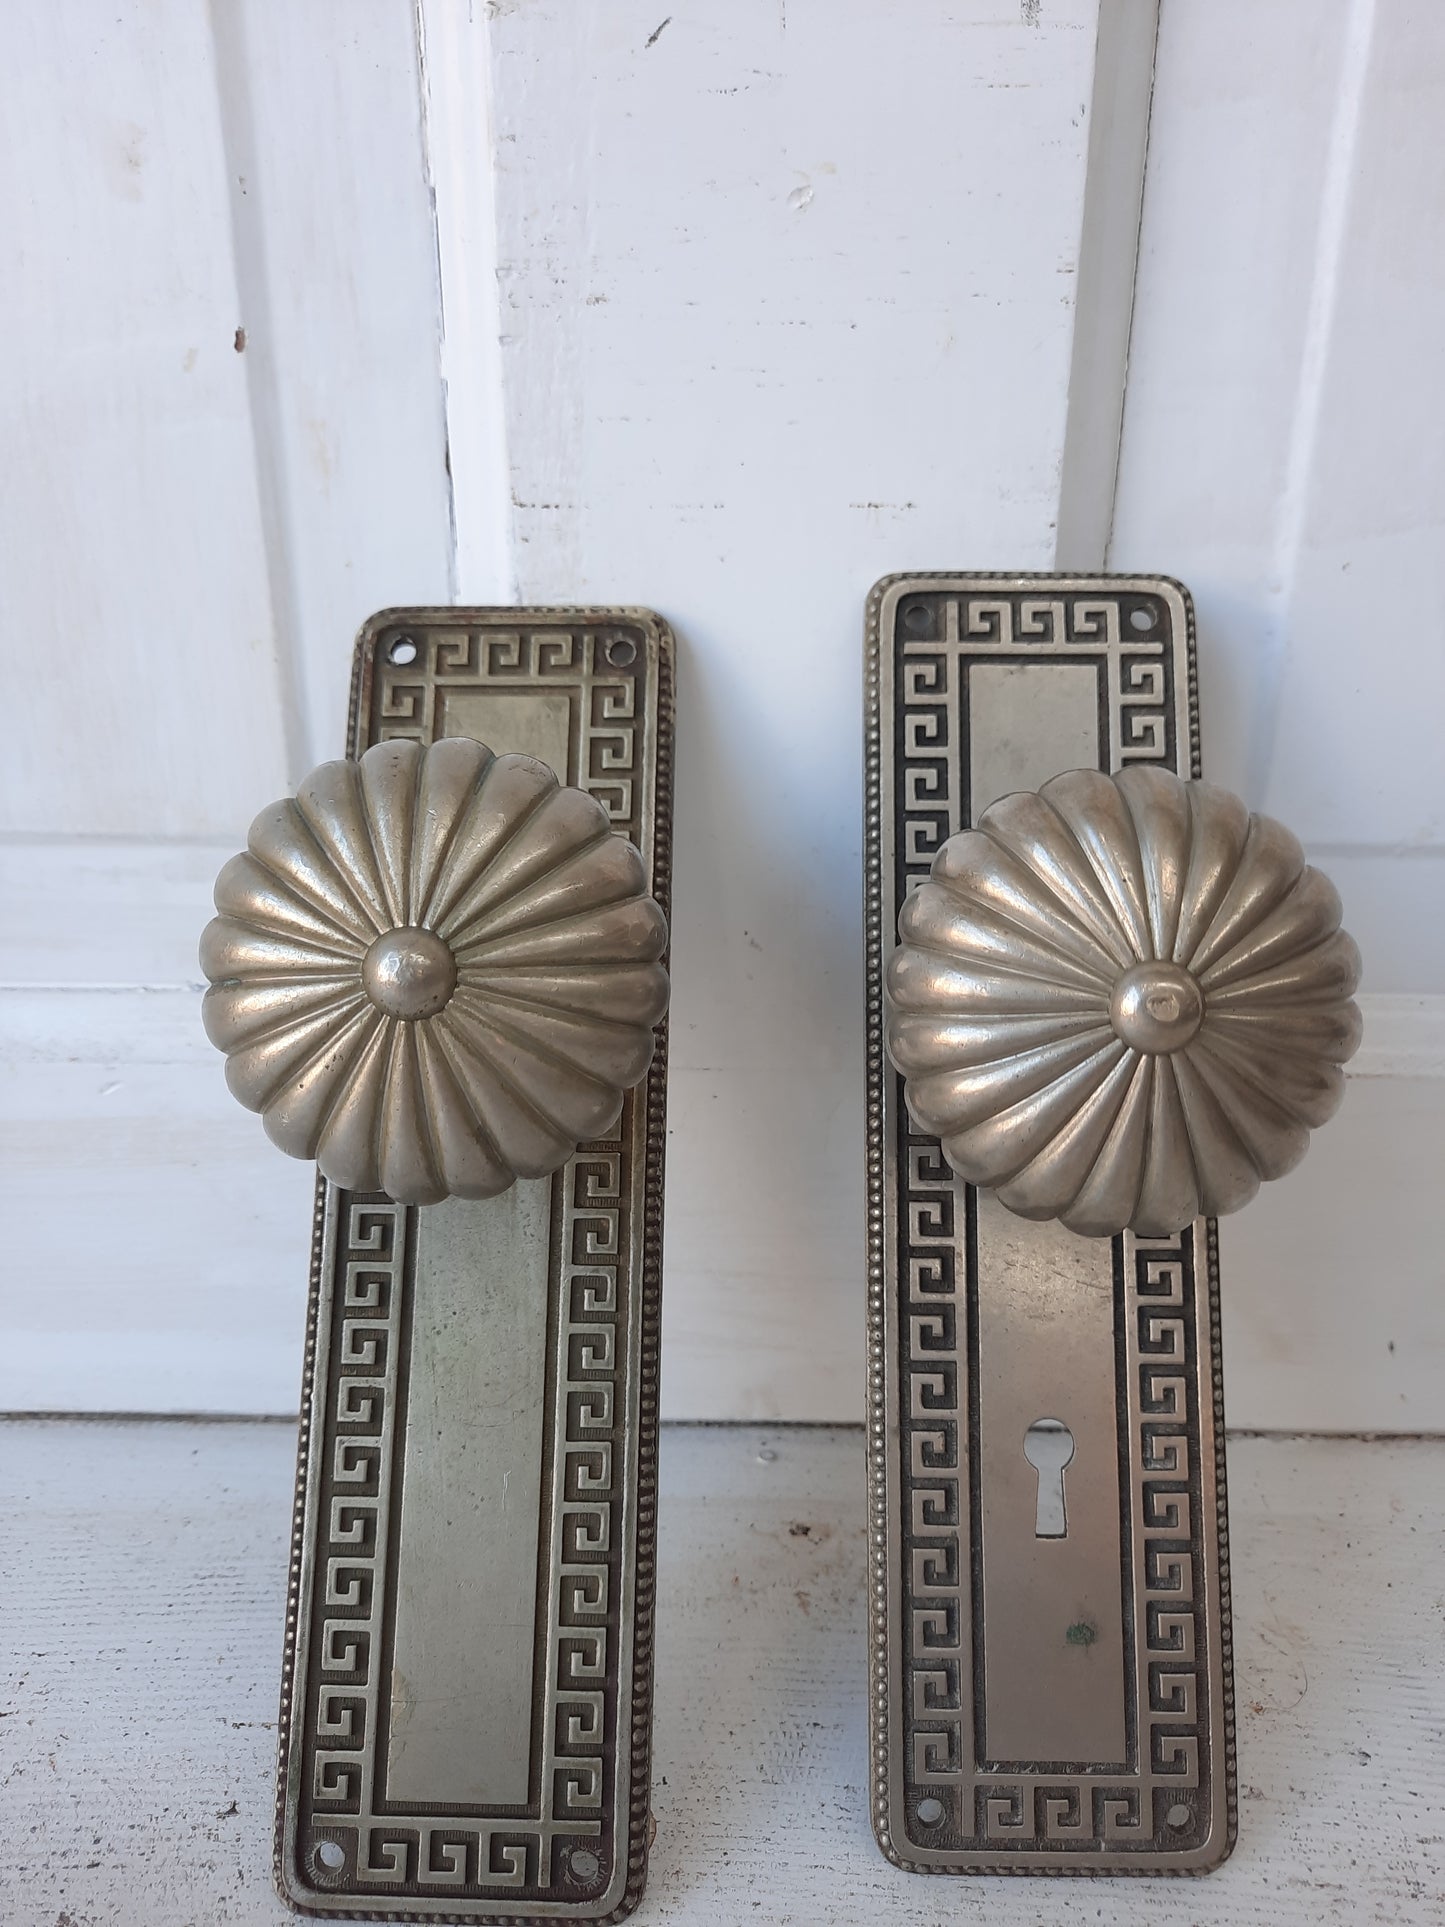 Yale Silver Antique Door Hardware Set with Greek Key Design, Silver Knobs and Plates Radial Design